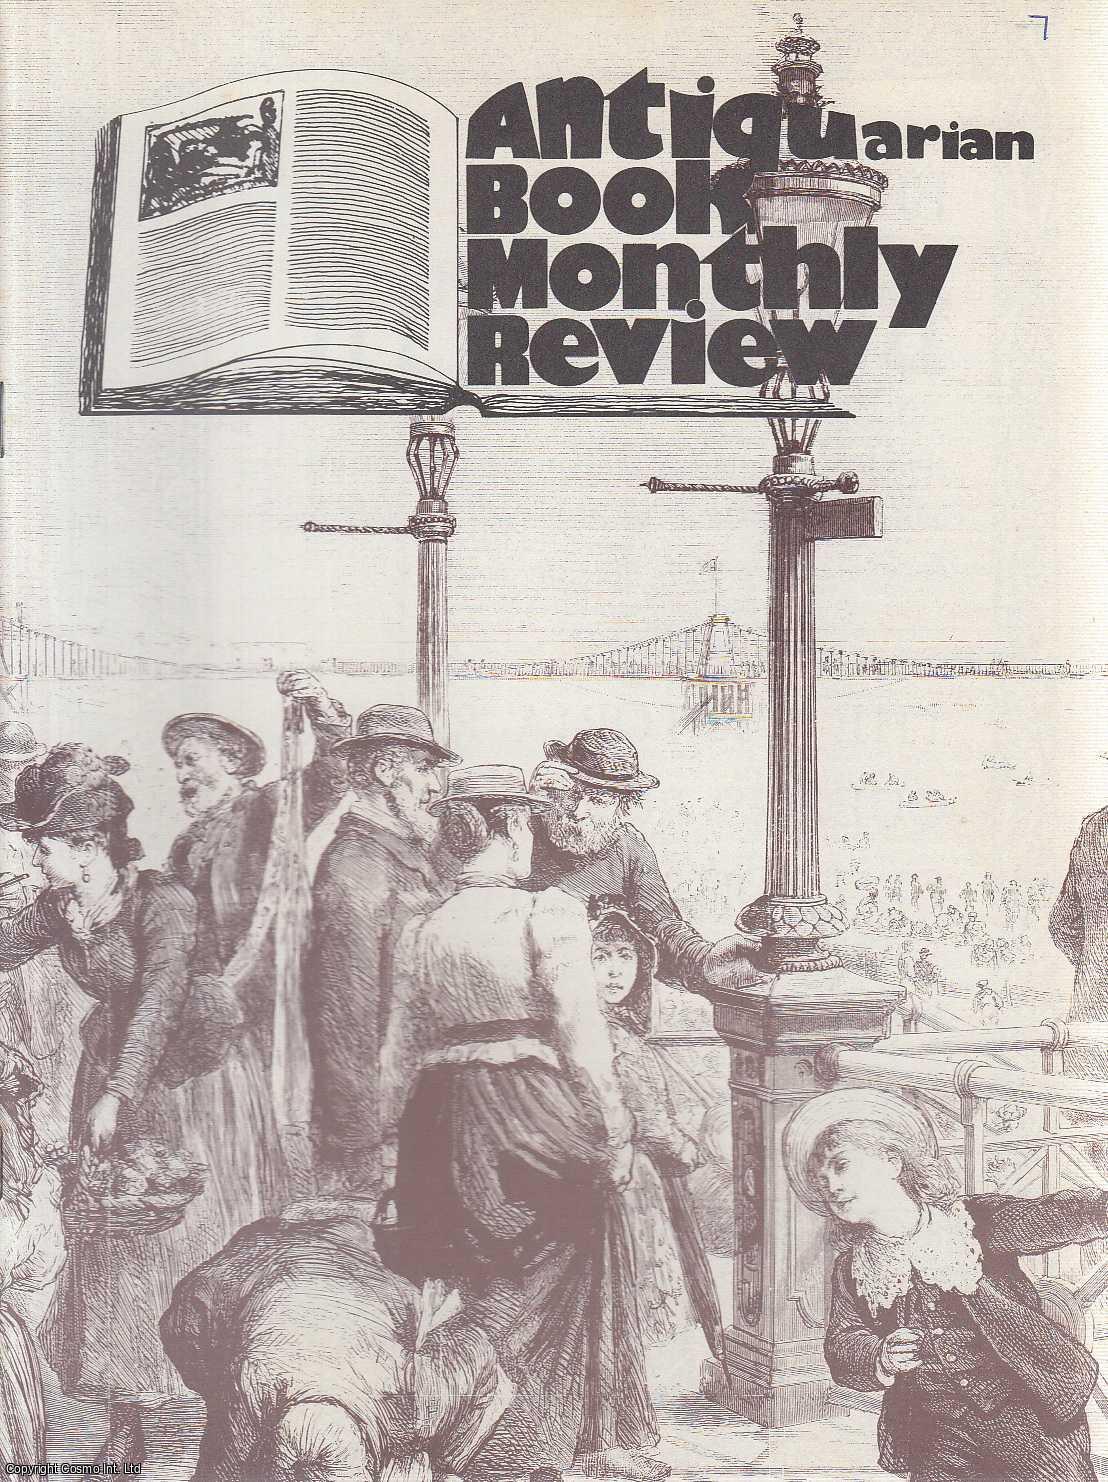 No Author Stated - The Nothmann Affair. The collapse of the Covent Garden Bookshop. An original article contained in a complete monthly issue of the Antiquarian Book Monthly Review (ABMR), 1974.